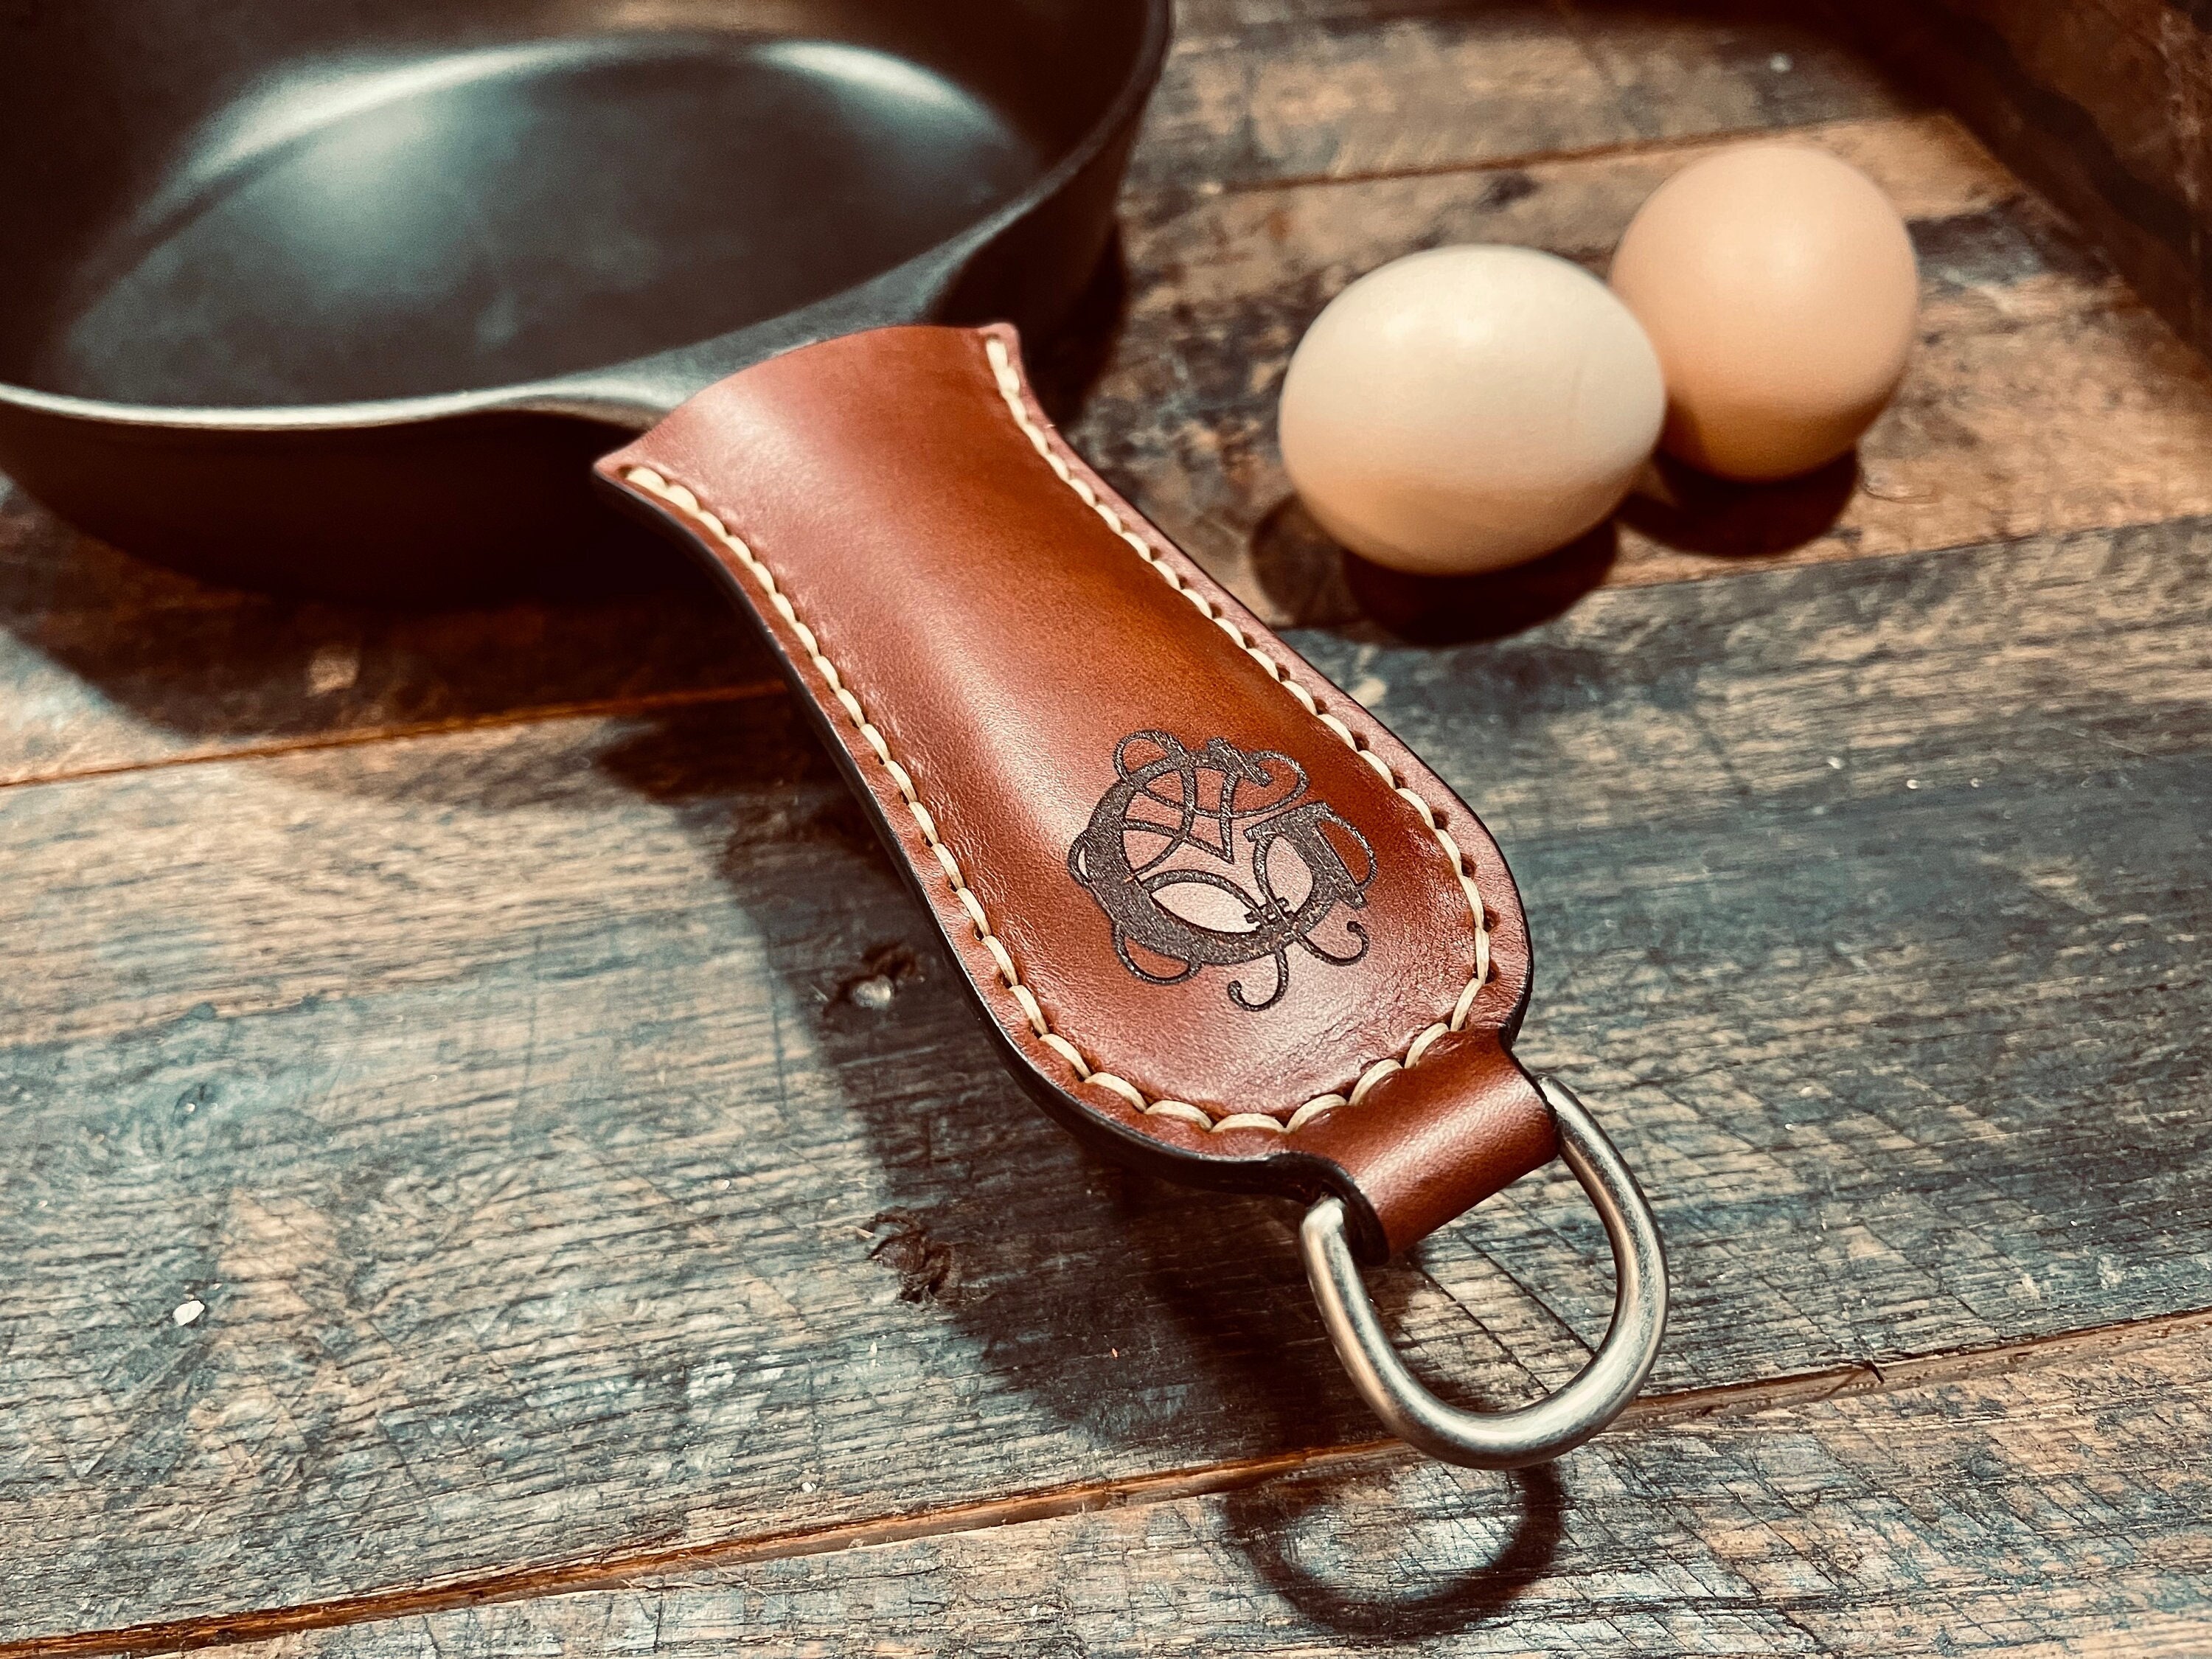 Leather Cast Iron Handle Cover - Extra Thick, Easy to Grip, Heat Resistant,  Cast Iron Pot Holders - Best Skillet Handle Cover Works with Vintage